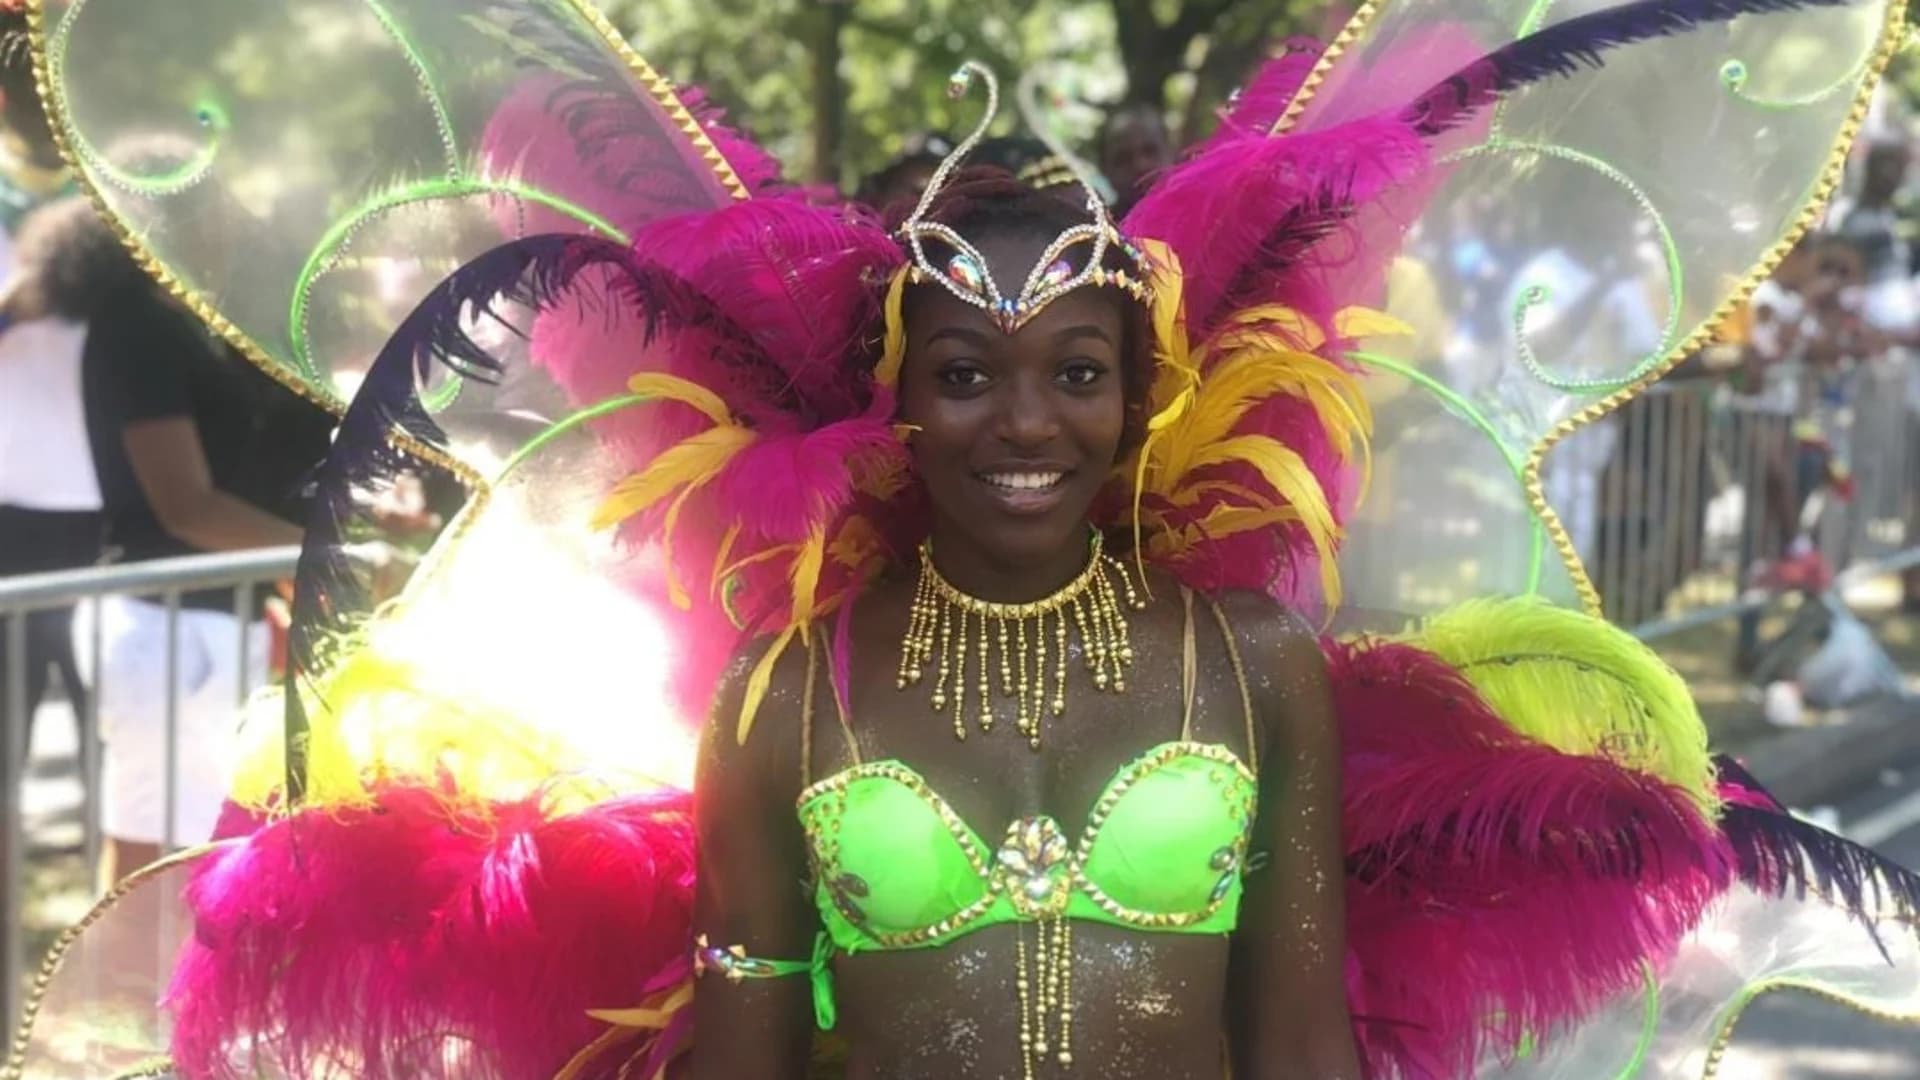 Brooklyn preps for West Indian American Day Carnival 2019